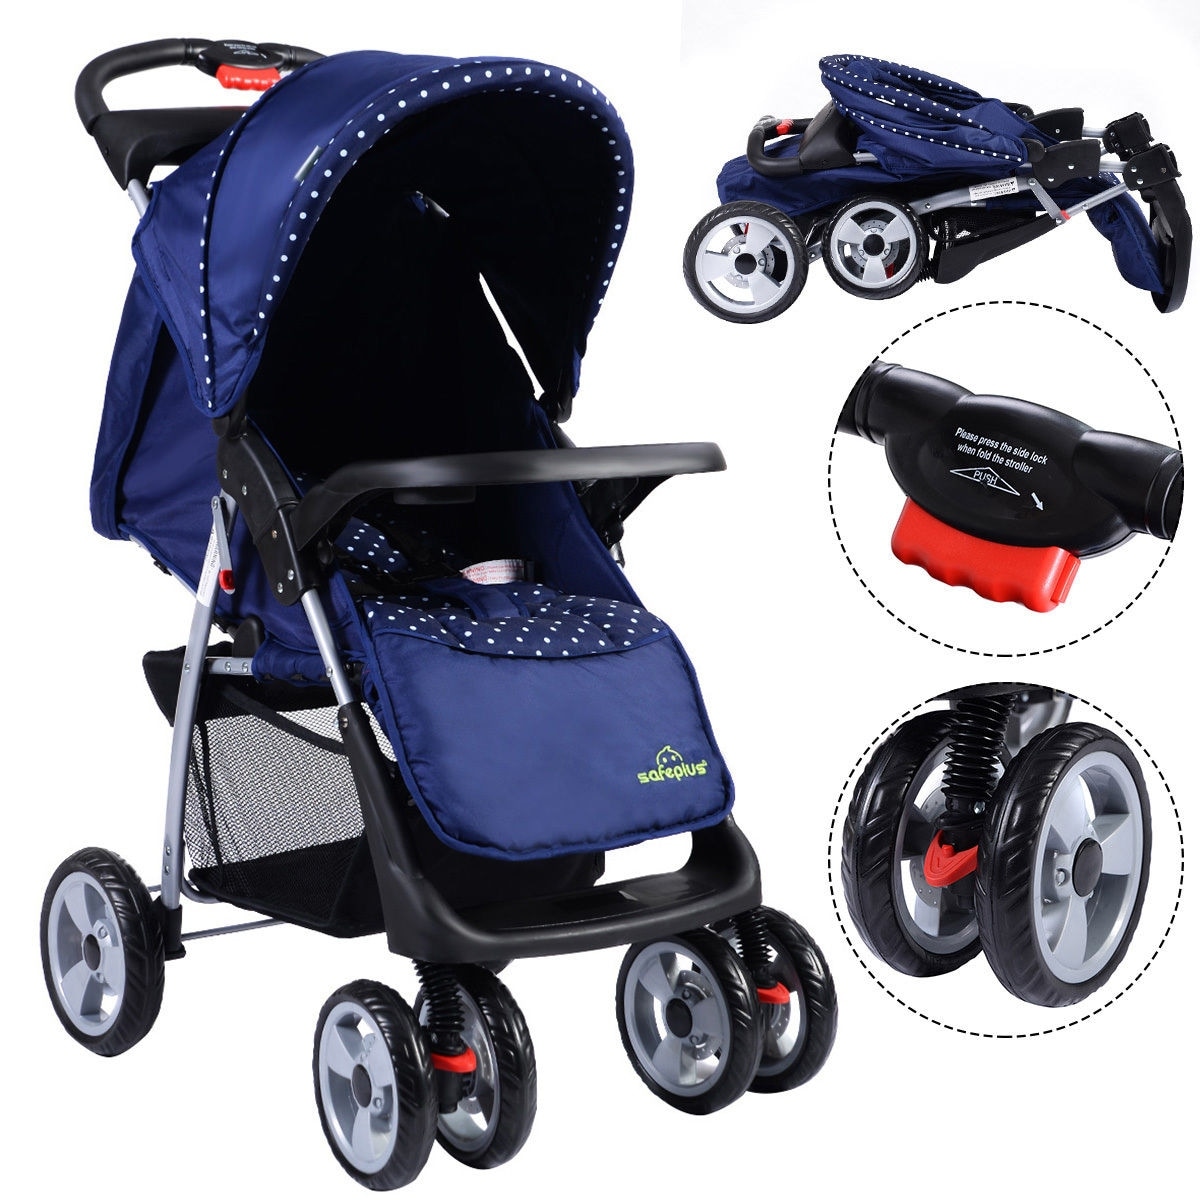 collapsible stroller for infants